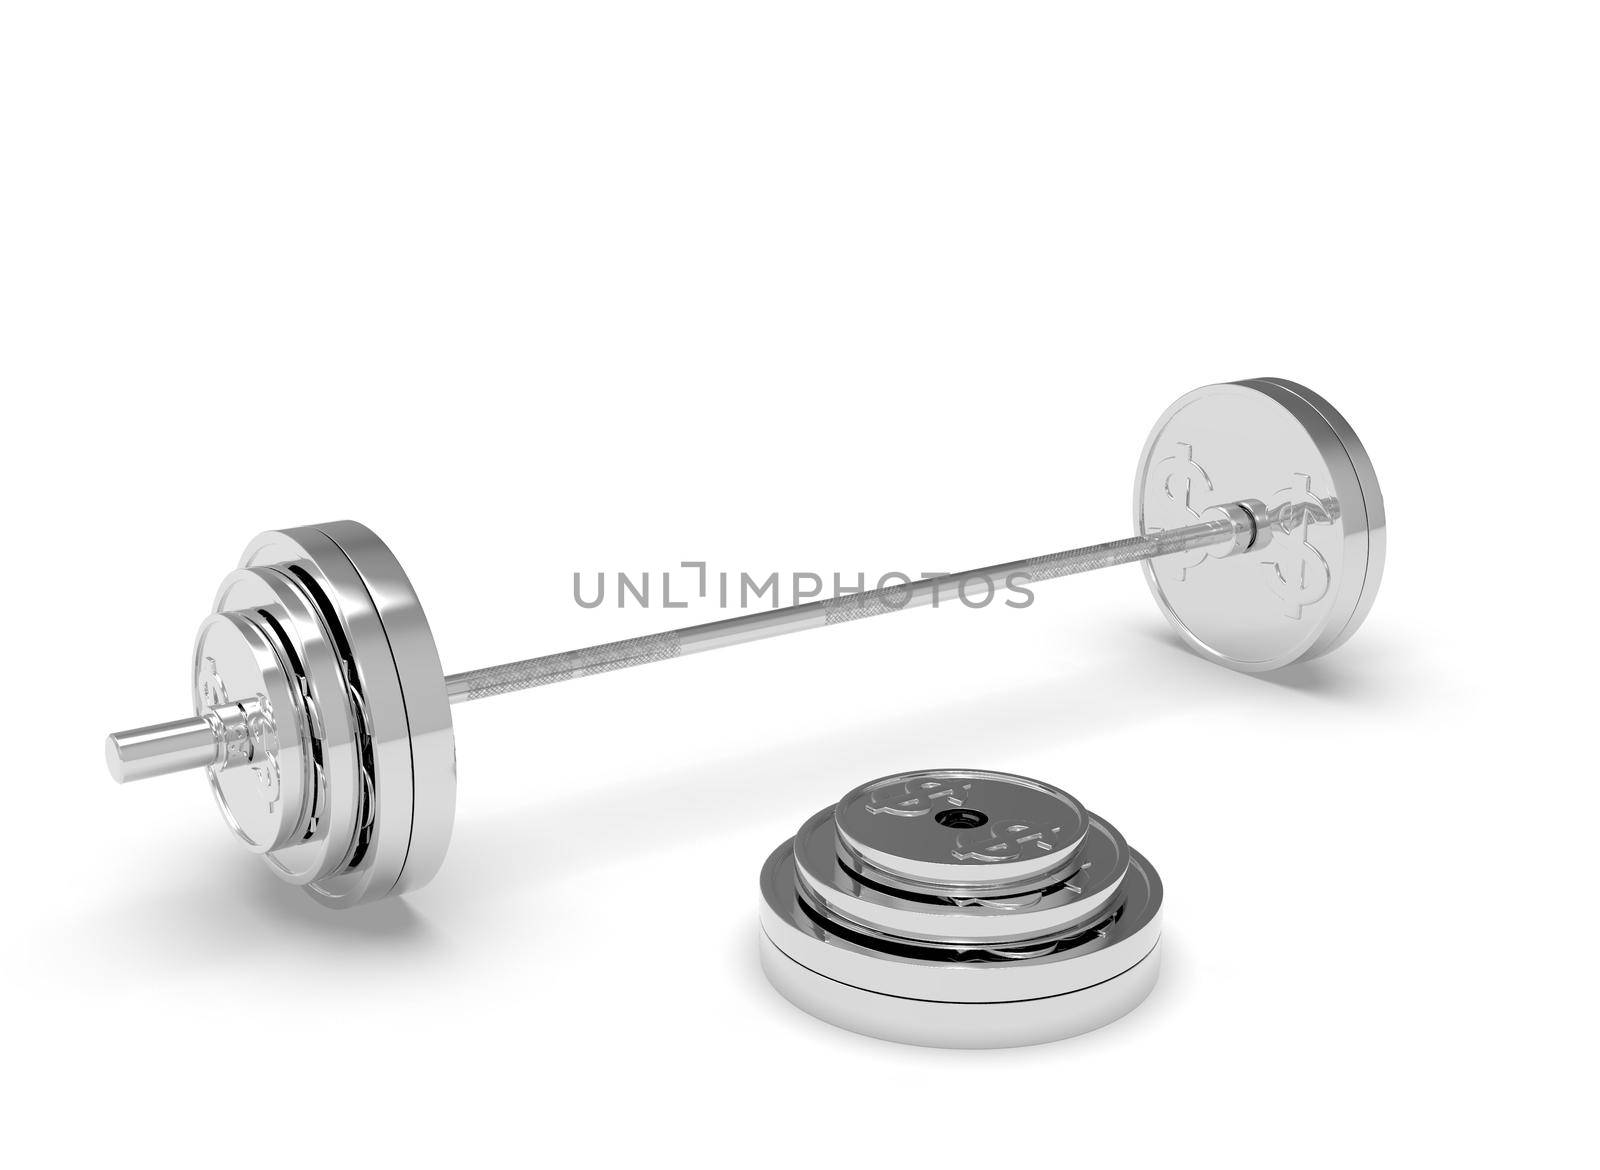 Silver barbell made of a dollar coin on a white background 3d-rendering.